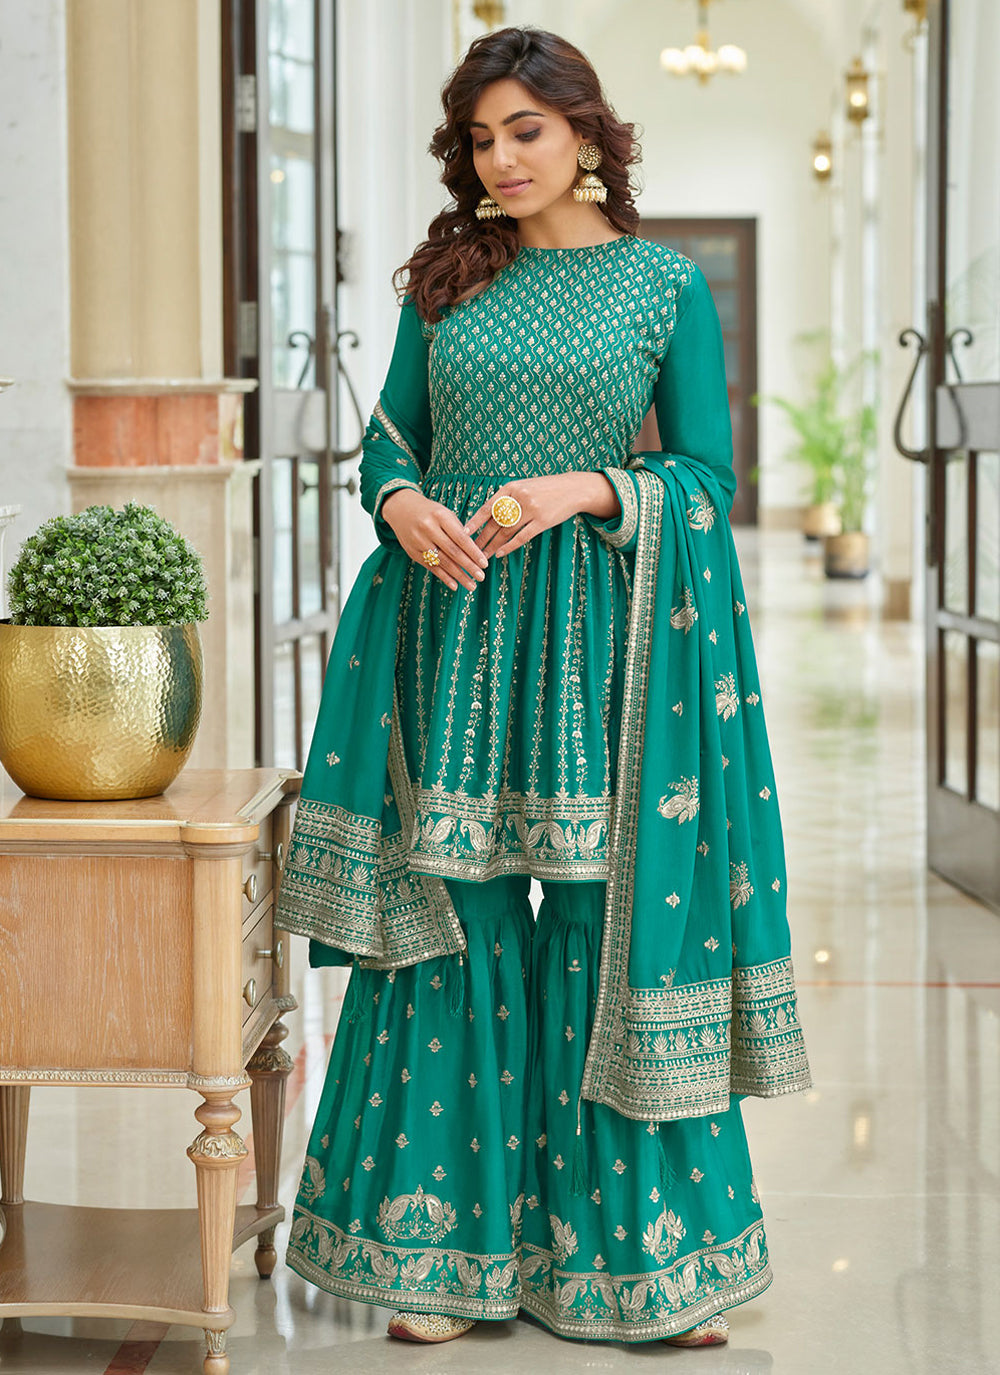 Chinon Embroidered Salwar Kameez in Turquoise Color